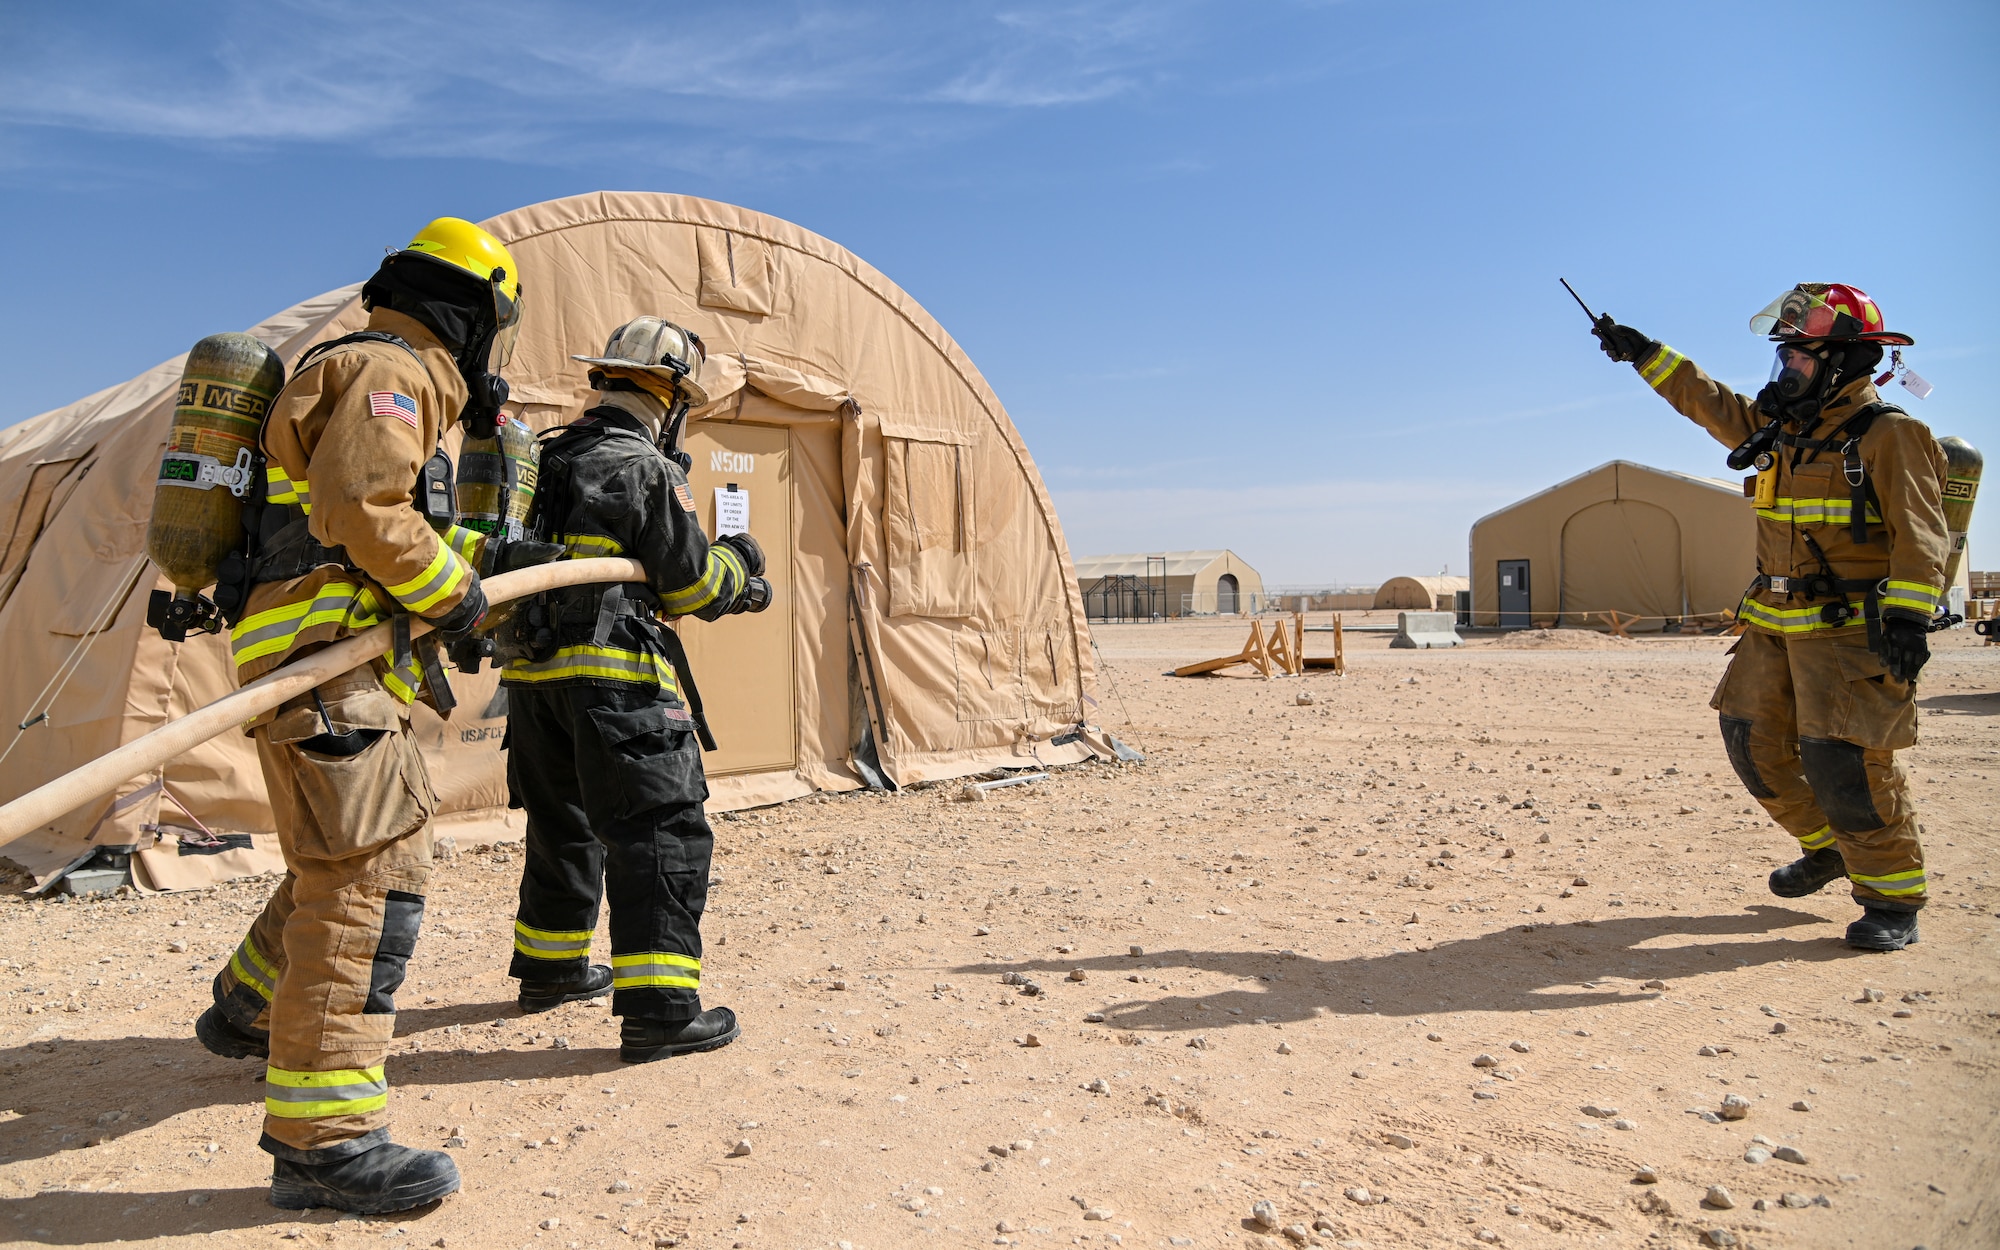 U.S. Air Force Brig. Gen. Robert Davis, center, 378th Air Expeditionary Wing commander, prepares to extinguish a simulated structure fire alongside members of the 378th Expeditionary Civil Engineer Squadron at Prince Sultan Air Base, Kingdom of Saudi Arabia, Dec. 9, 2021. Members of the 378th ECES taught Davis how to don a complete fire suit as well as how to properly extinguish a structure fire. (U.S. Air Force photo by Staff Sgt. Christina Graves)